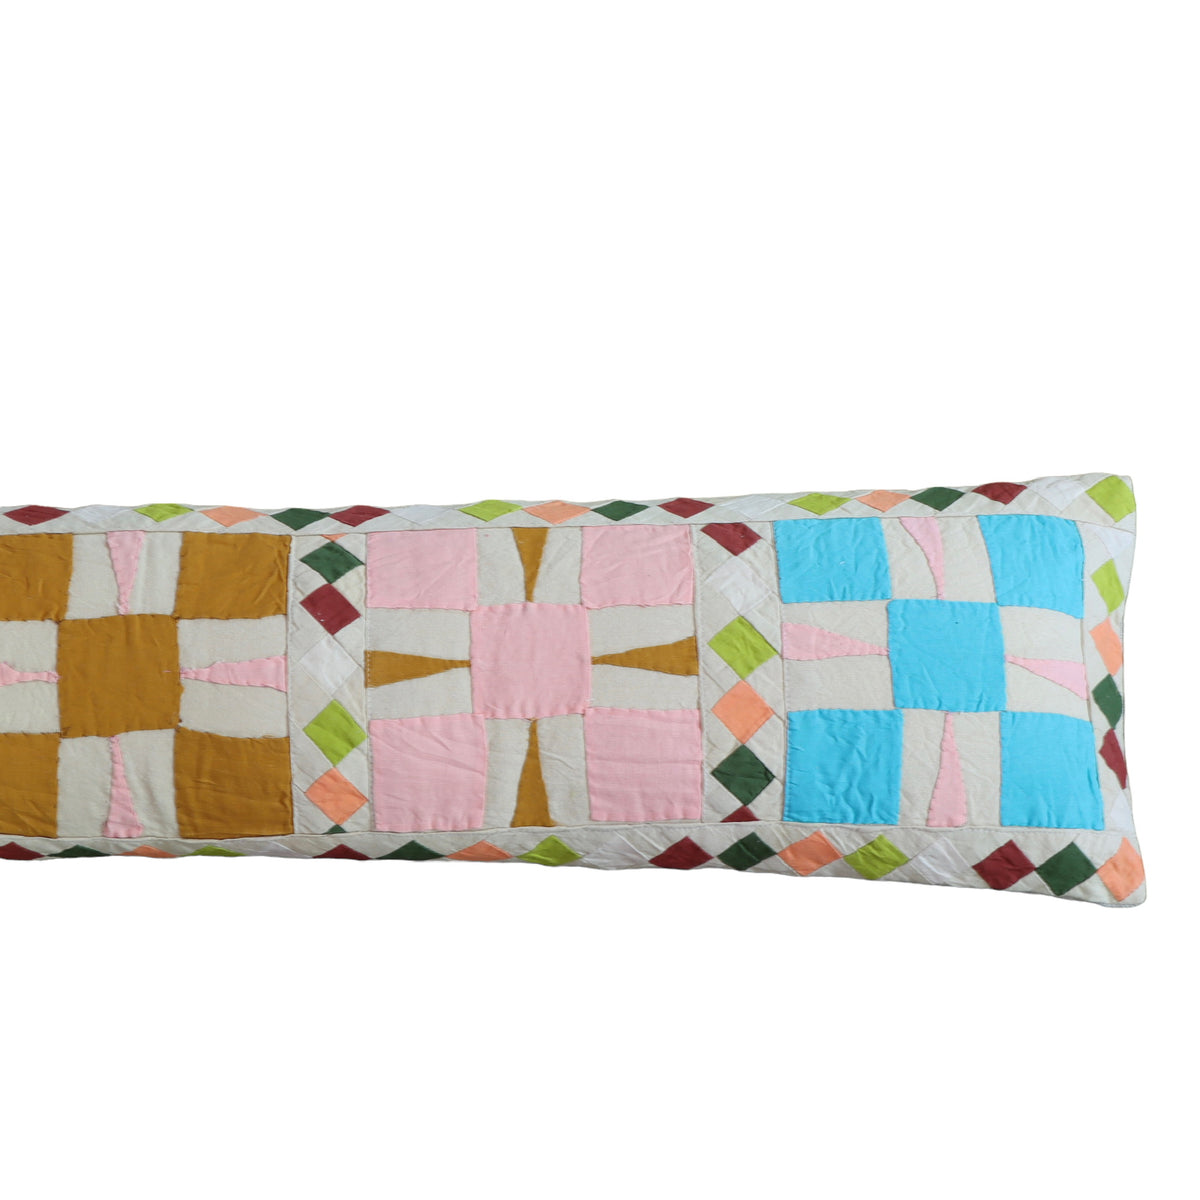 Summer at the Farm Cotton Quilted Lumbar Pillow - Holistic Habitat 